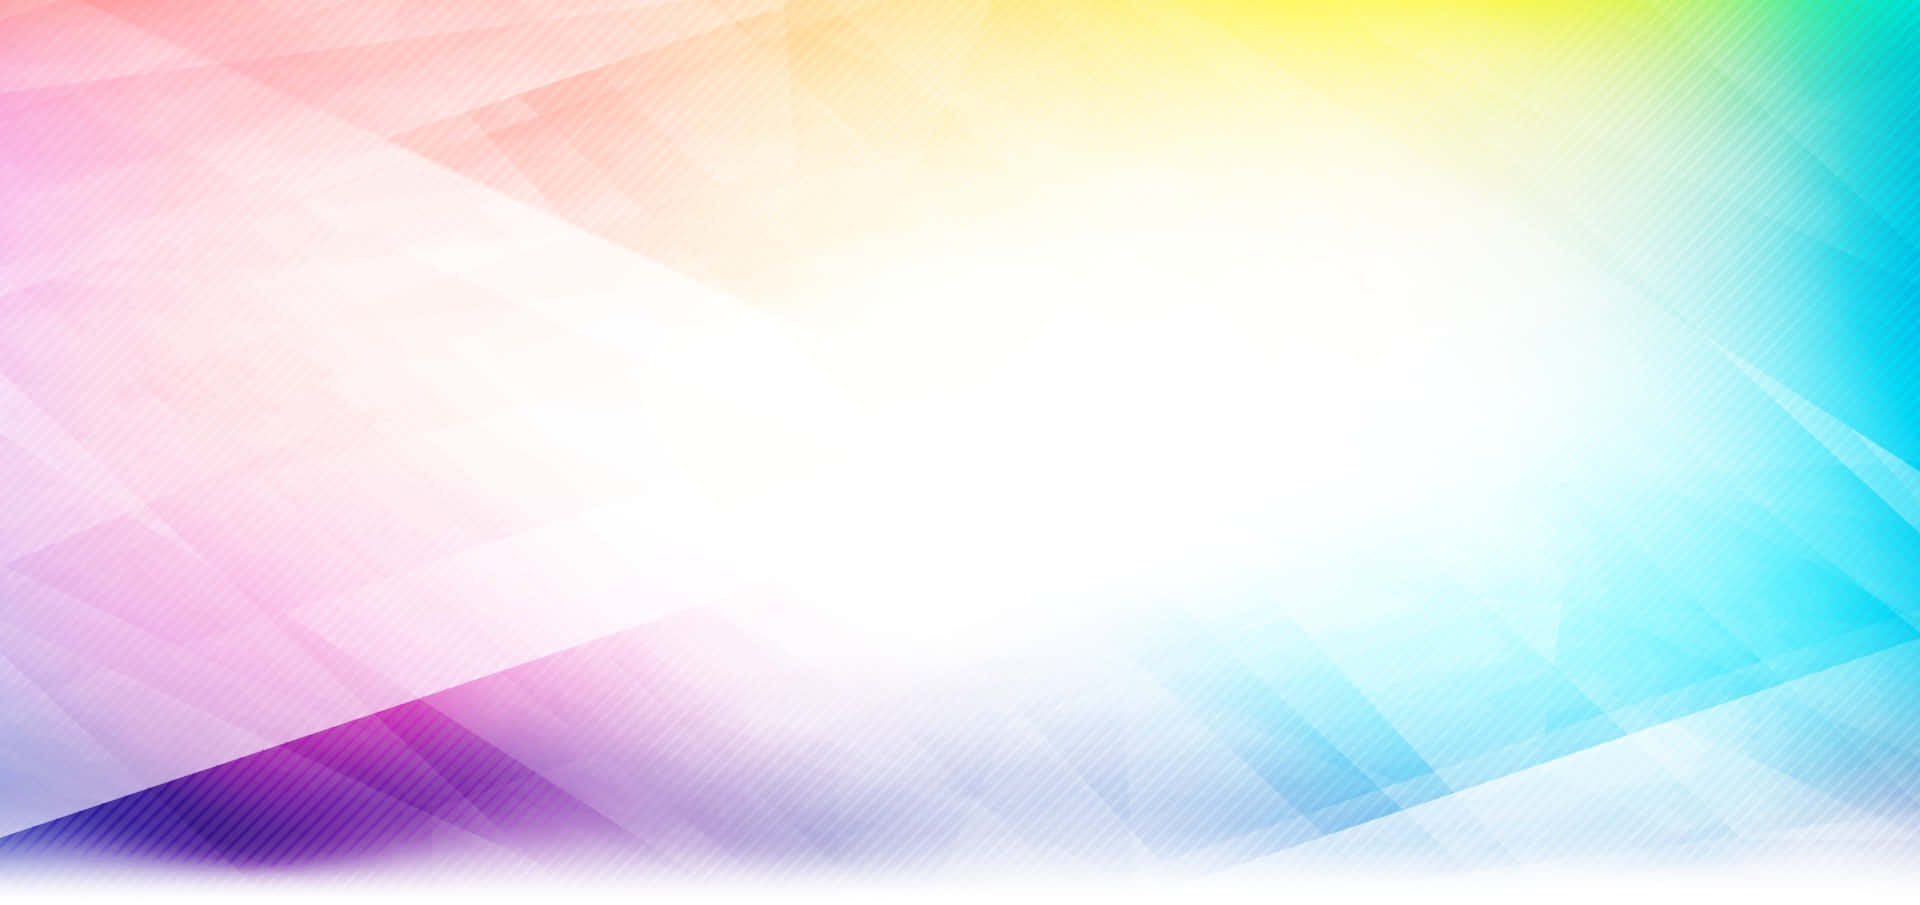 "Breathtaking Abstract Colorful Background"